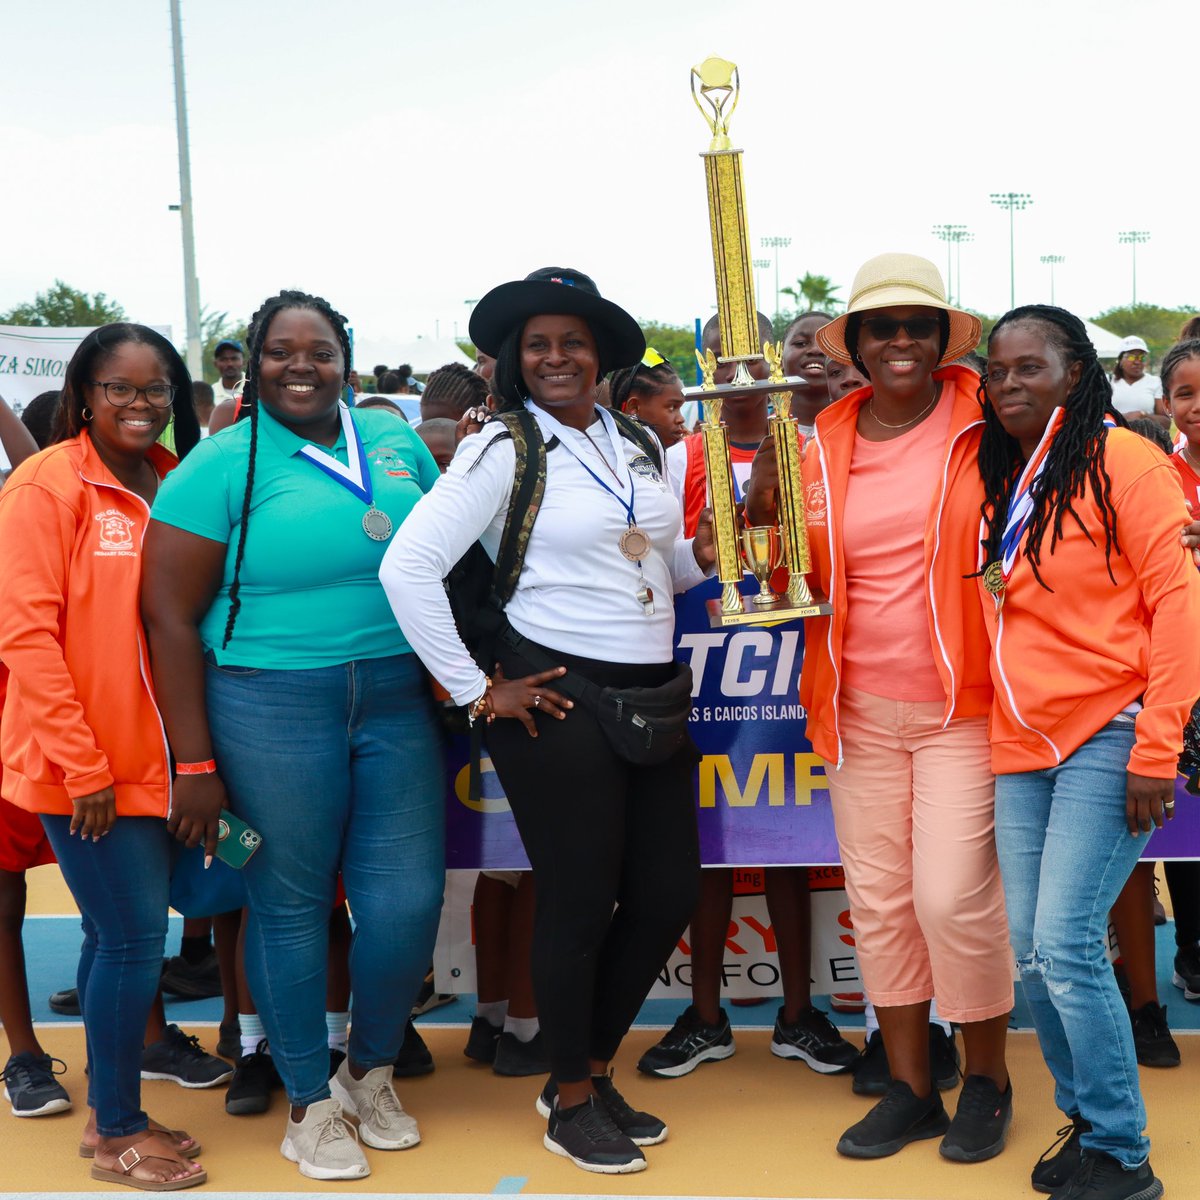 Congratulations to Ona Glinton Primary School on being Inter-Primary Track and Field Champions three years in a row!! 🧡🧡🧡🧡

#3Peat #CallitONA #interprimary #grassrootstogreatness #turksandcaicos